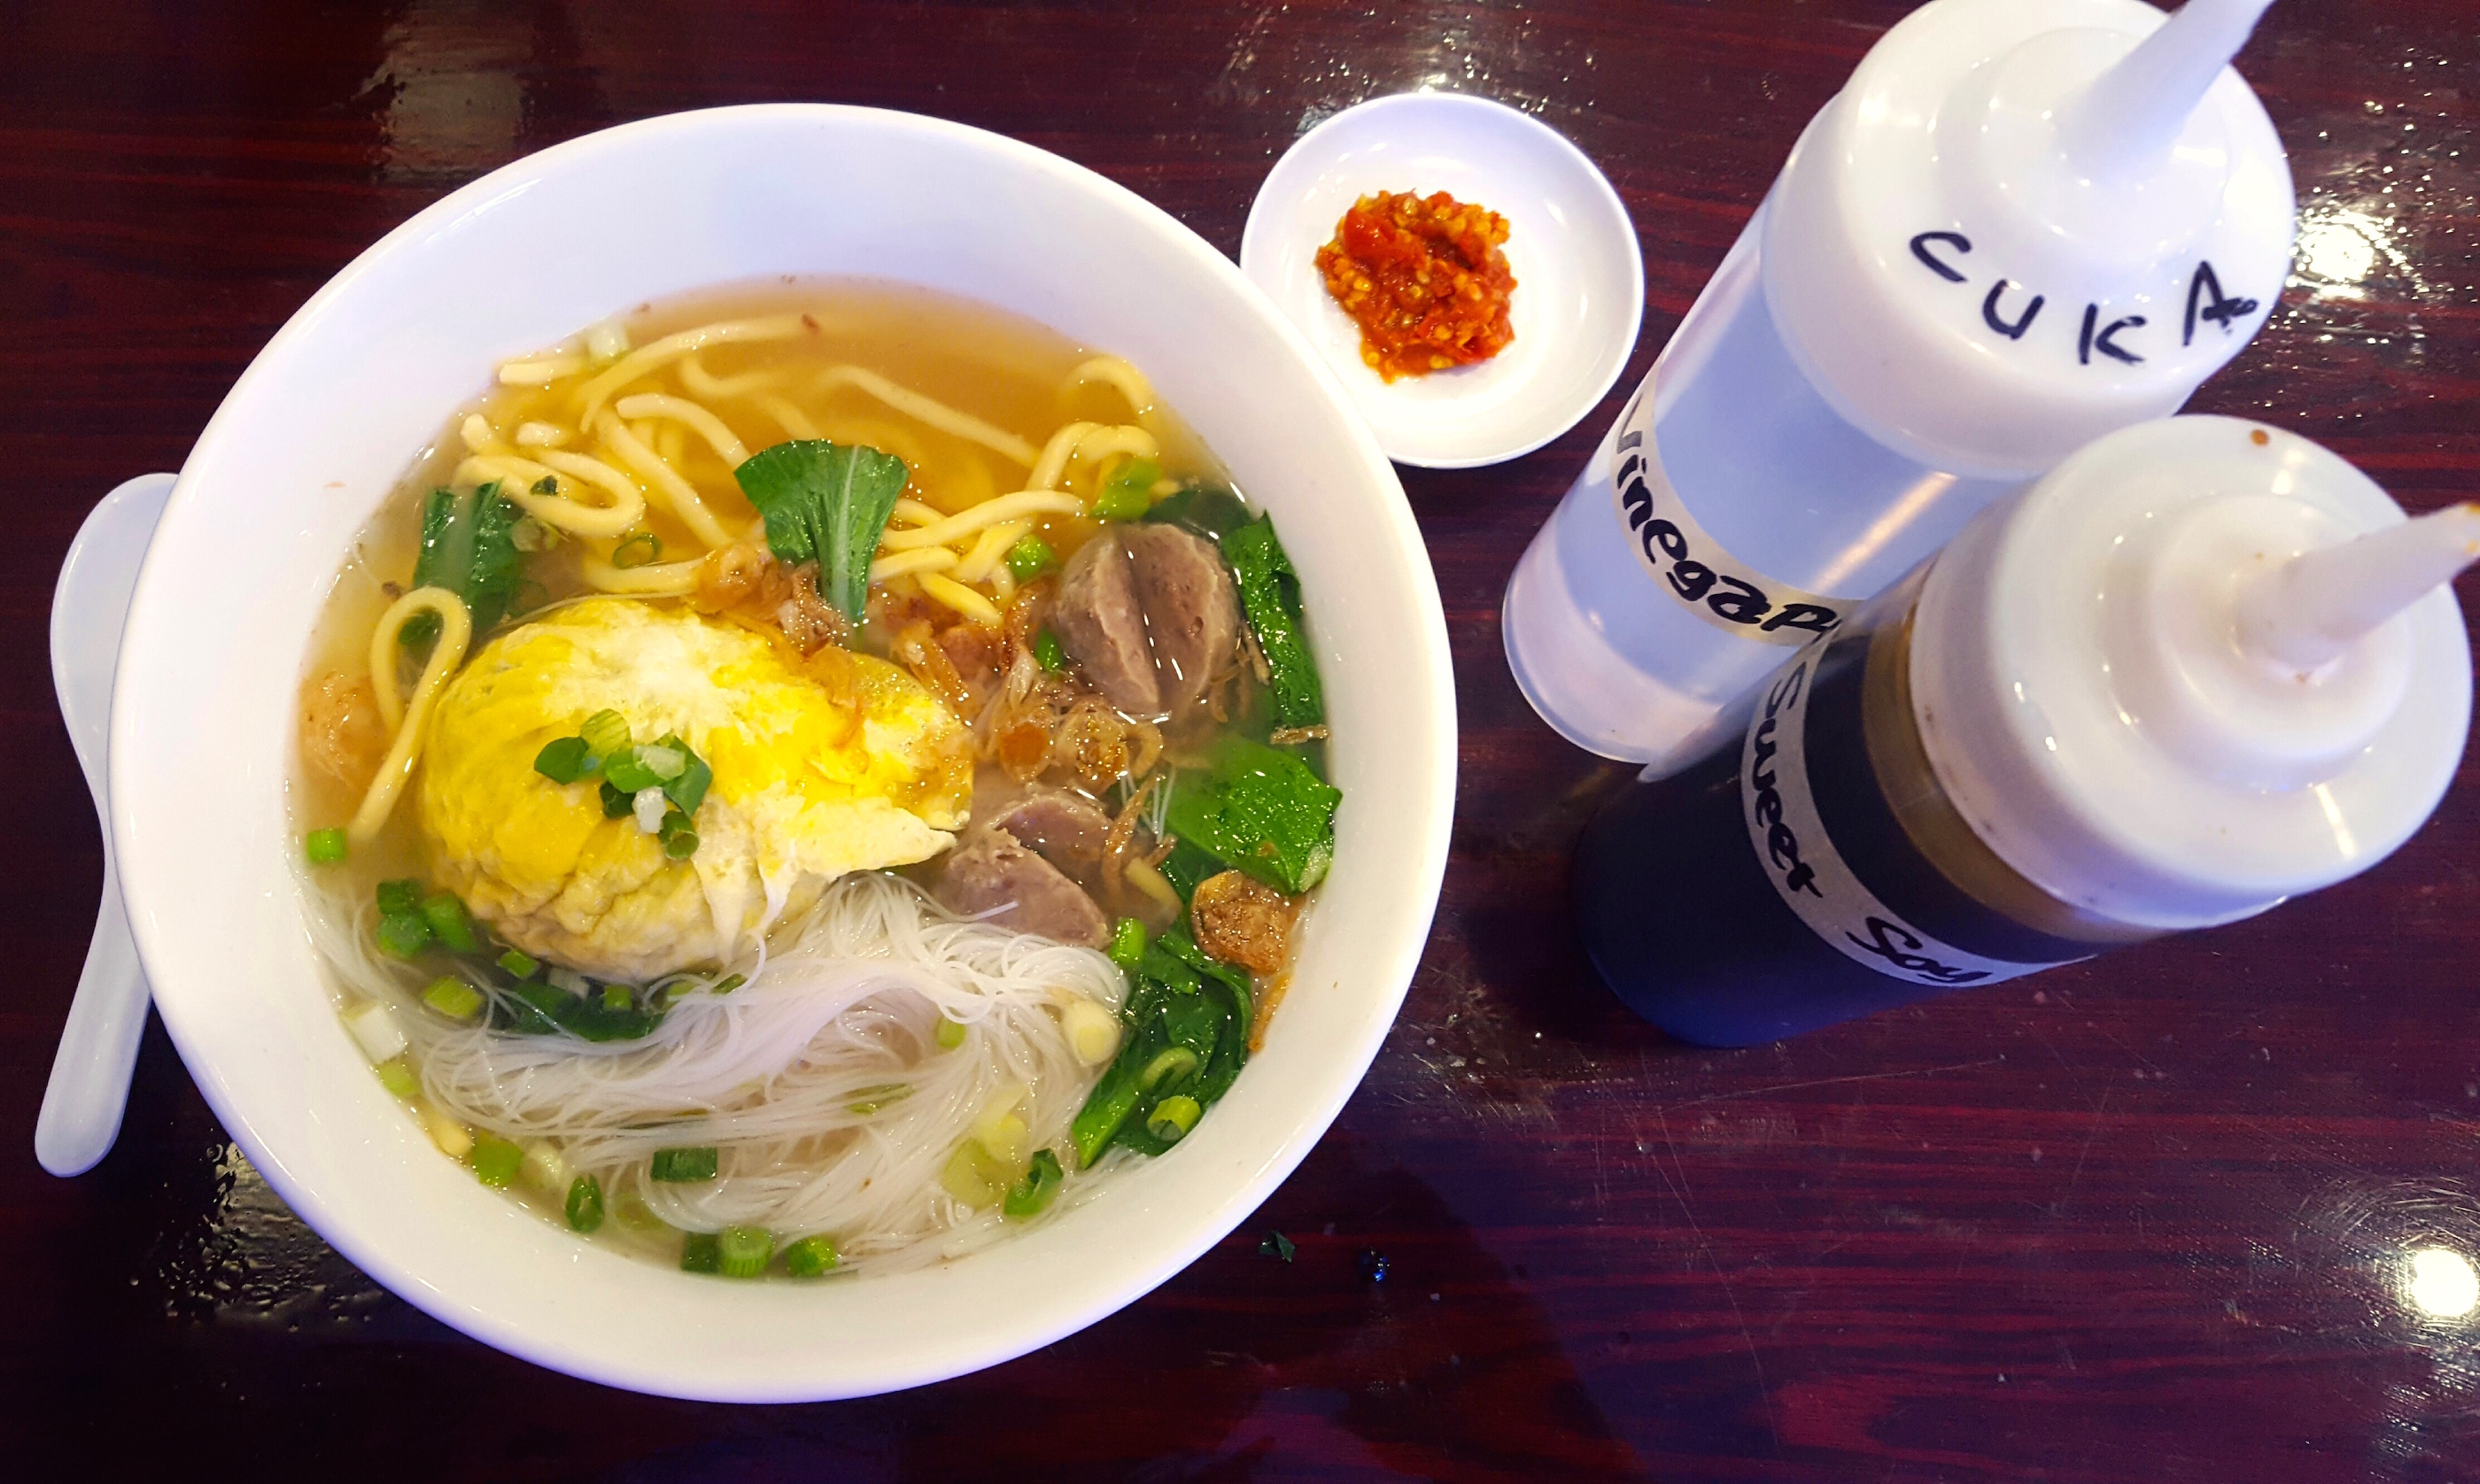 Bakso kabut features a giant meatball shrouded in a fried egg. 